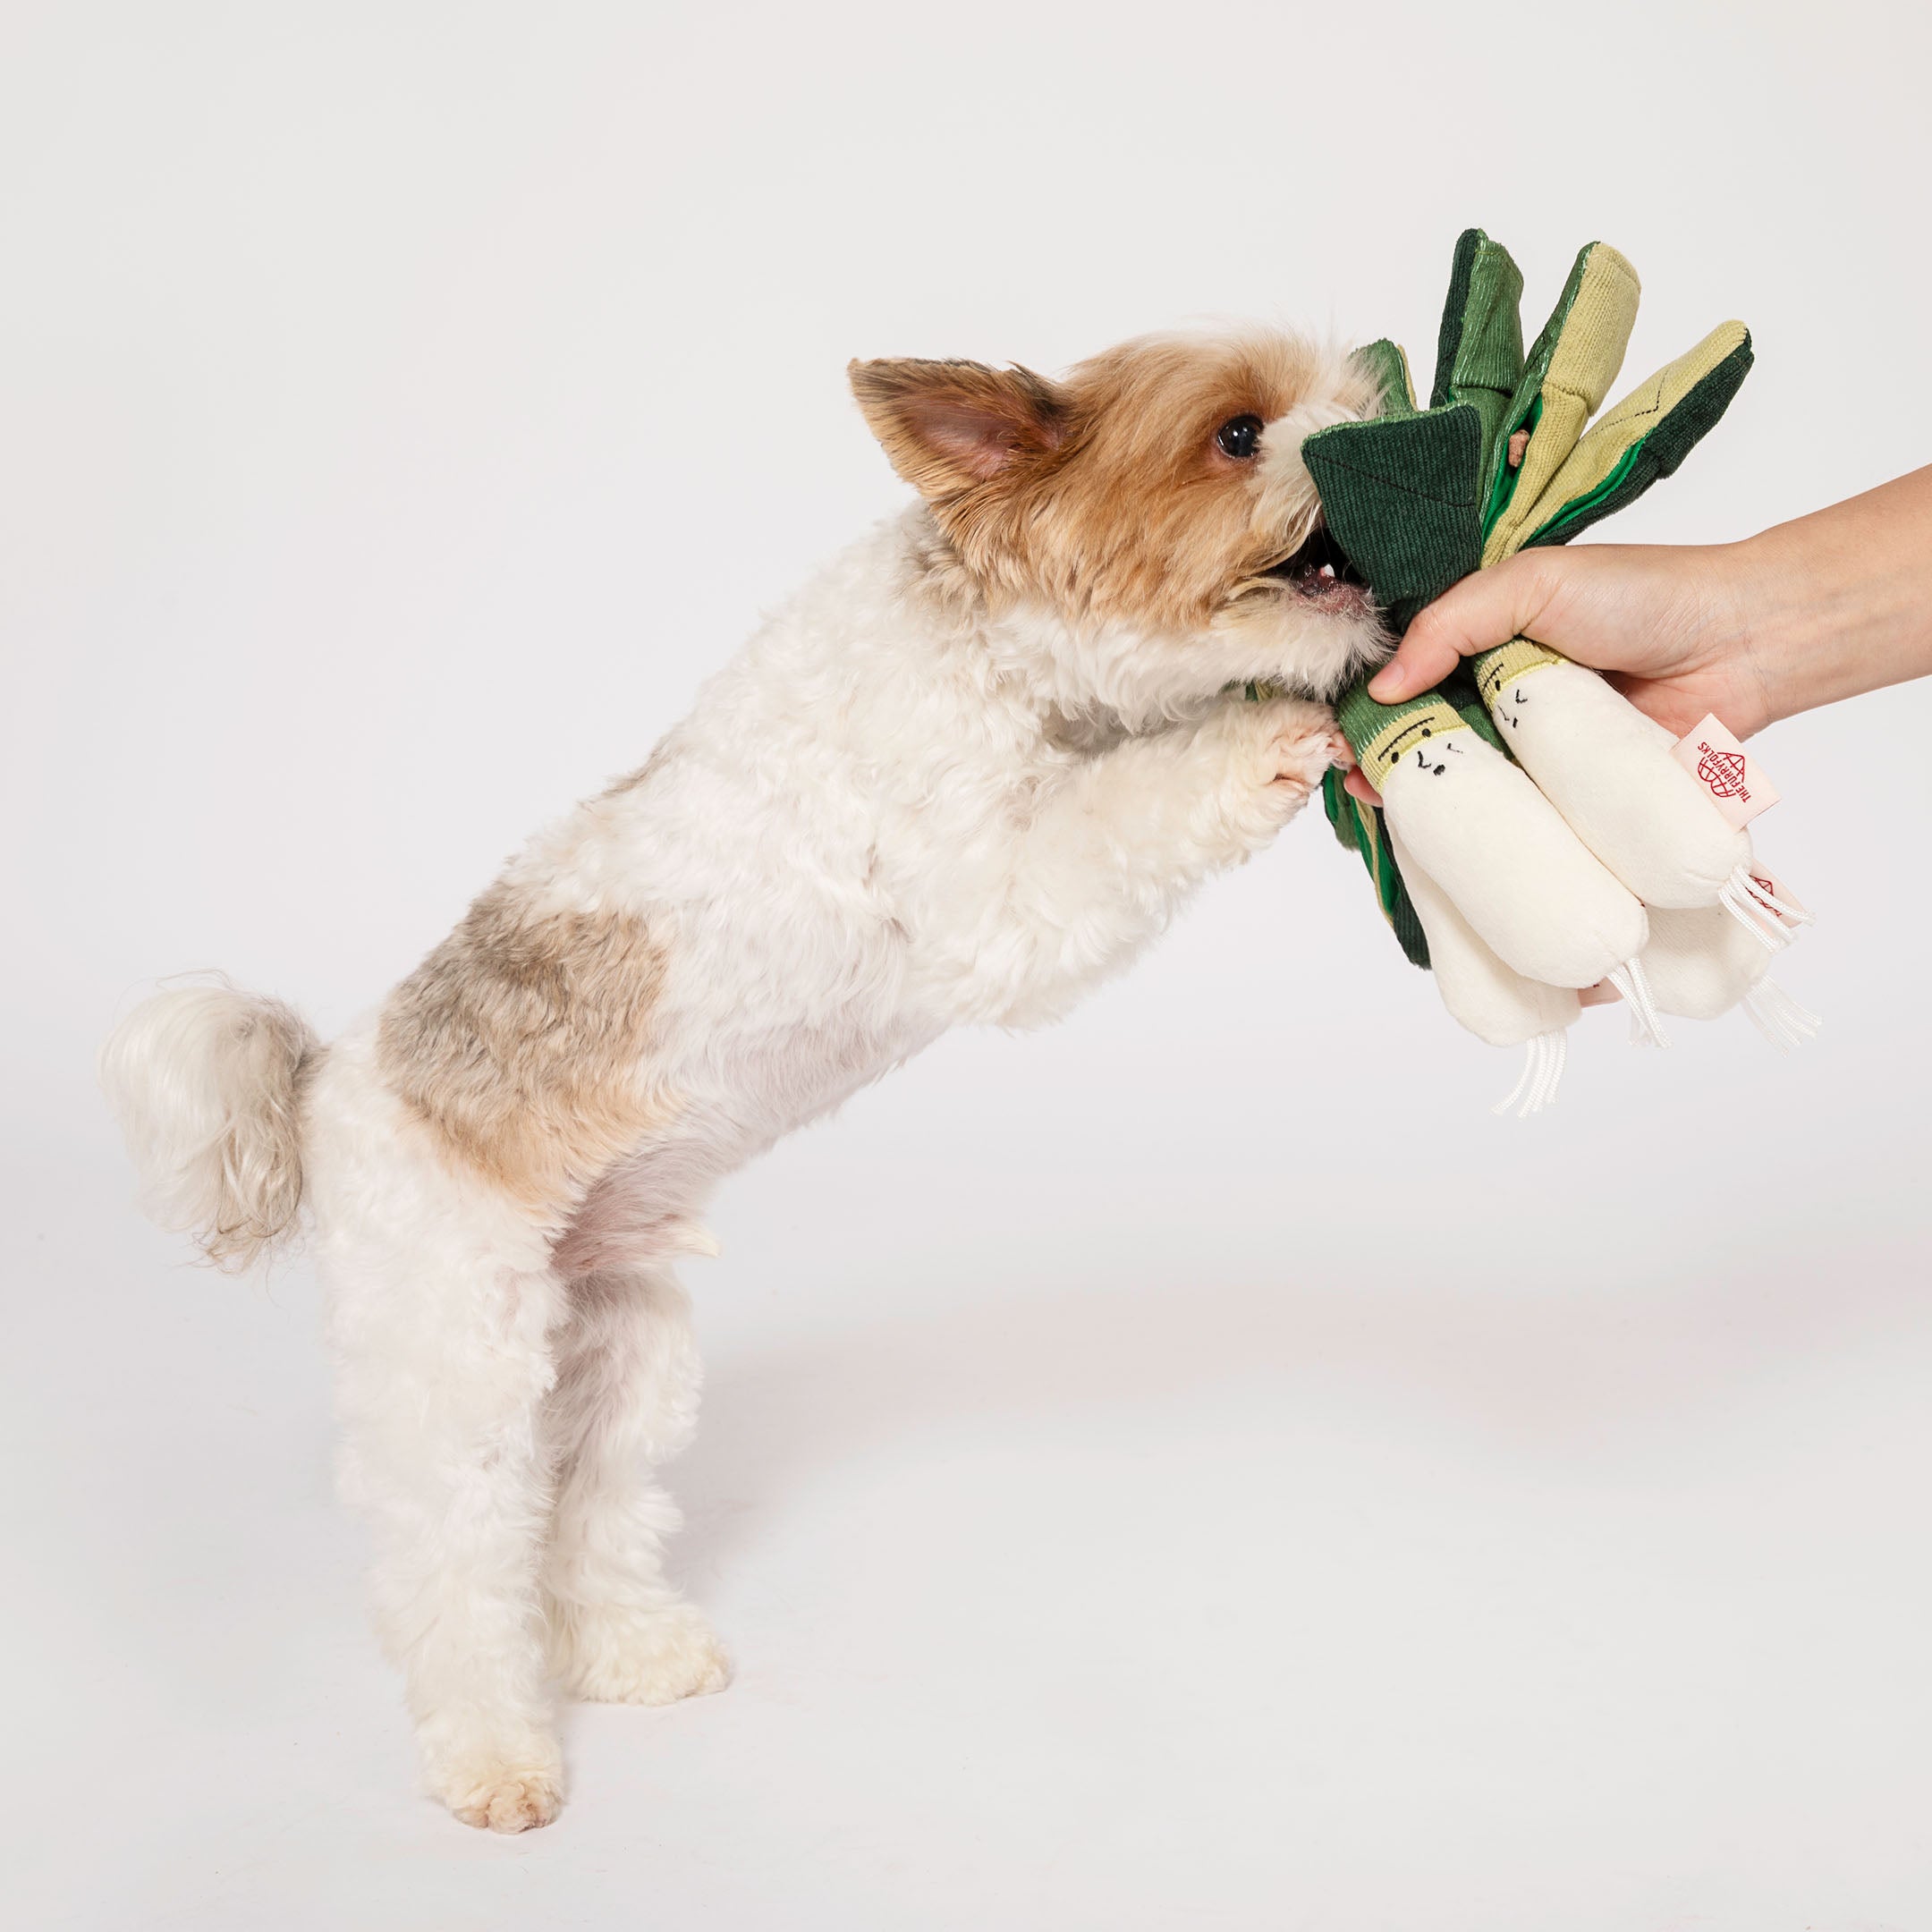 Fluffy dog playfully standing on hind legs to reach a green onion-shaped nosework toy held by a human hand, encouraging interactive play and scent detection training.